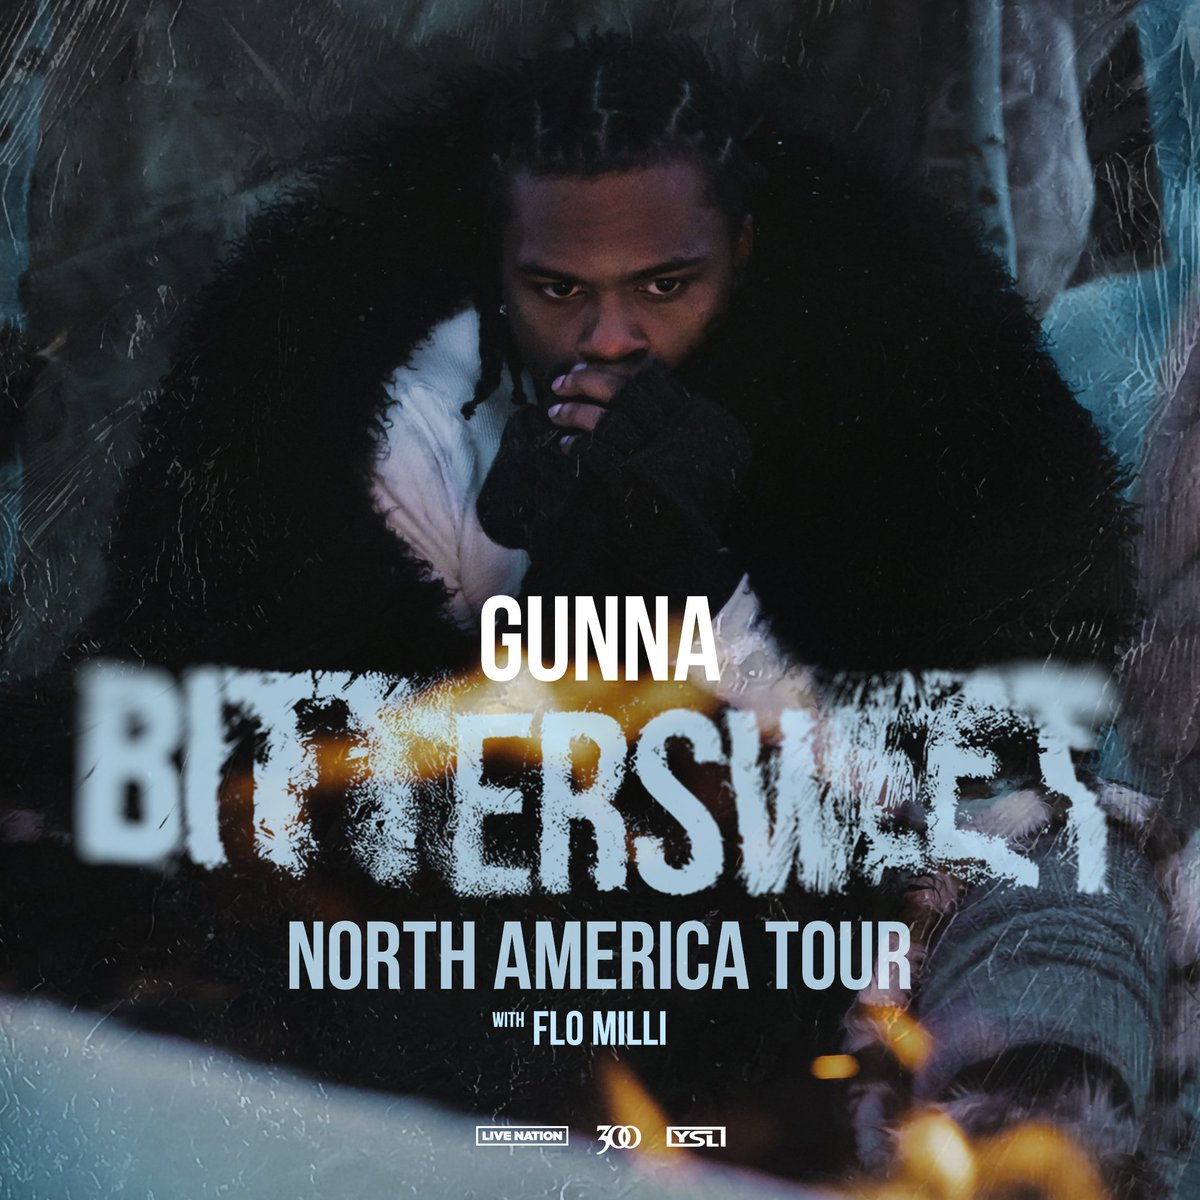 WE WANT TO SEND YOU AND A FRIEND TO MIAMI TO SEE @1GunnaGunna ON THE BITTERSWEET TOUR WITH SPECIAL GUEST @_FloMilli AT THE KASEYA CENTER AS A VIP! PLUS, THE WINNER AND GUEST WILL MEET GUNNA AT THE SHOW! TO ENTER SIRIUSXM.COM/GUNNATOUR BY MAY 16TH. SEE DETAILS! 🙌